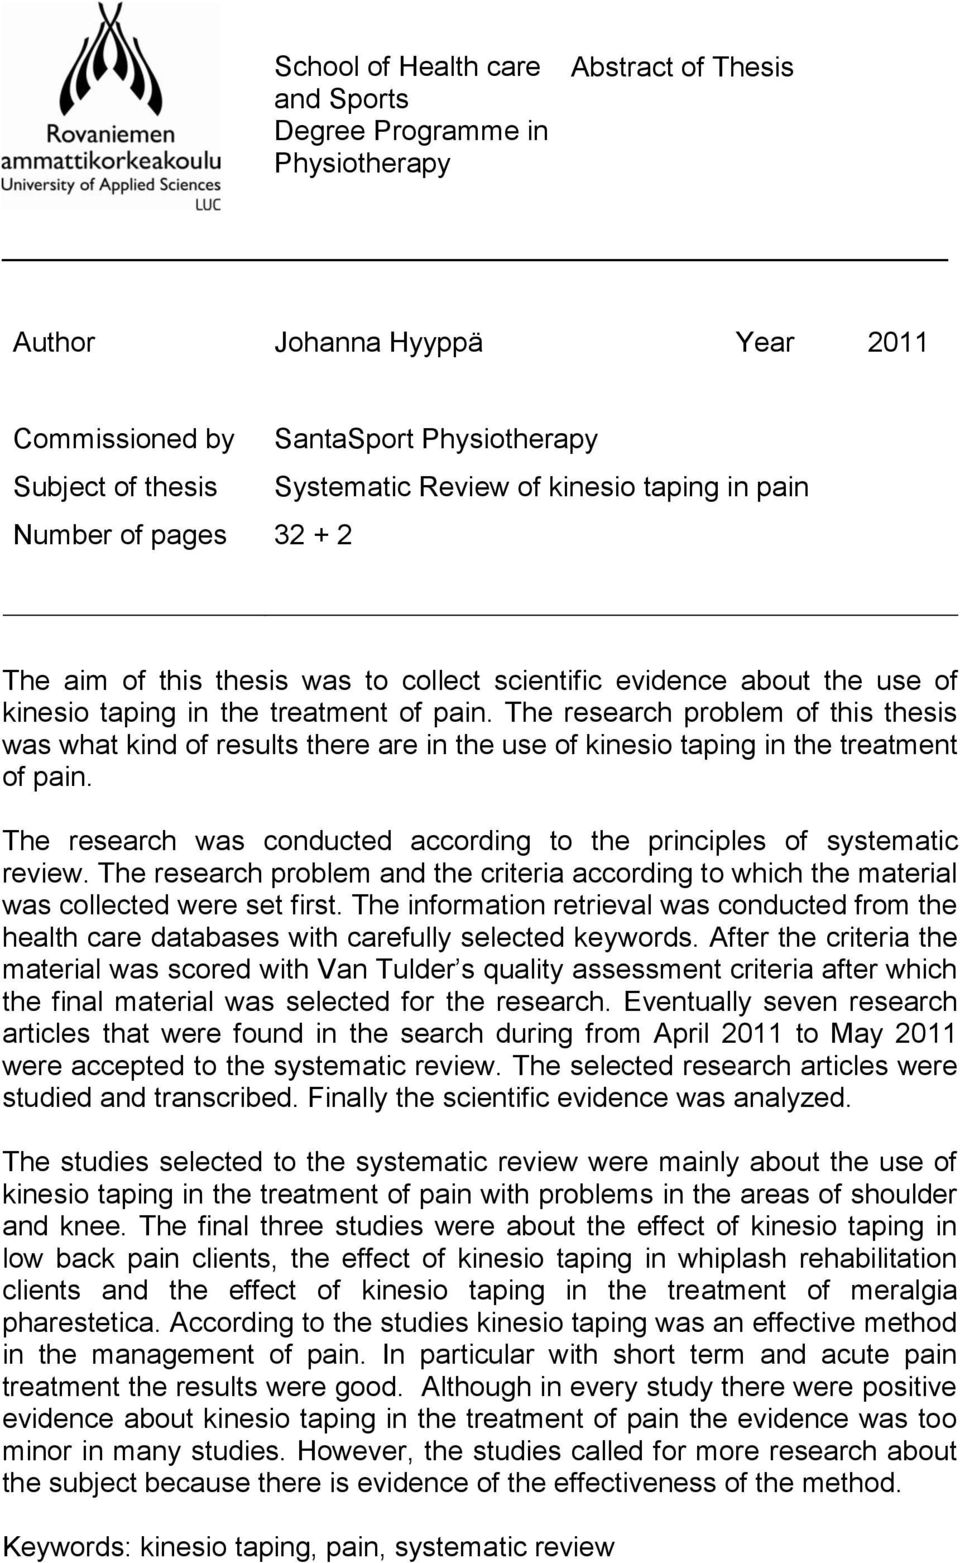 The research problem of this thesis was what kind of results there are in the use of kinesio taping in the treatment of pain.